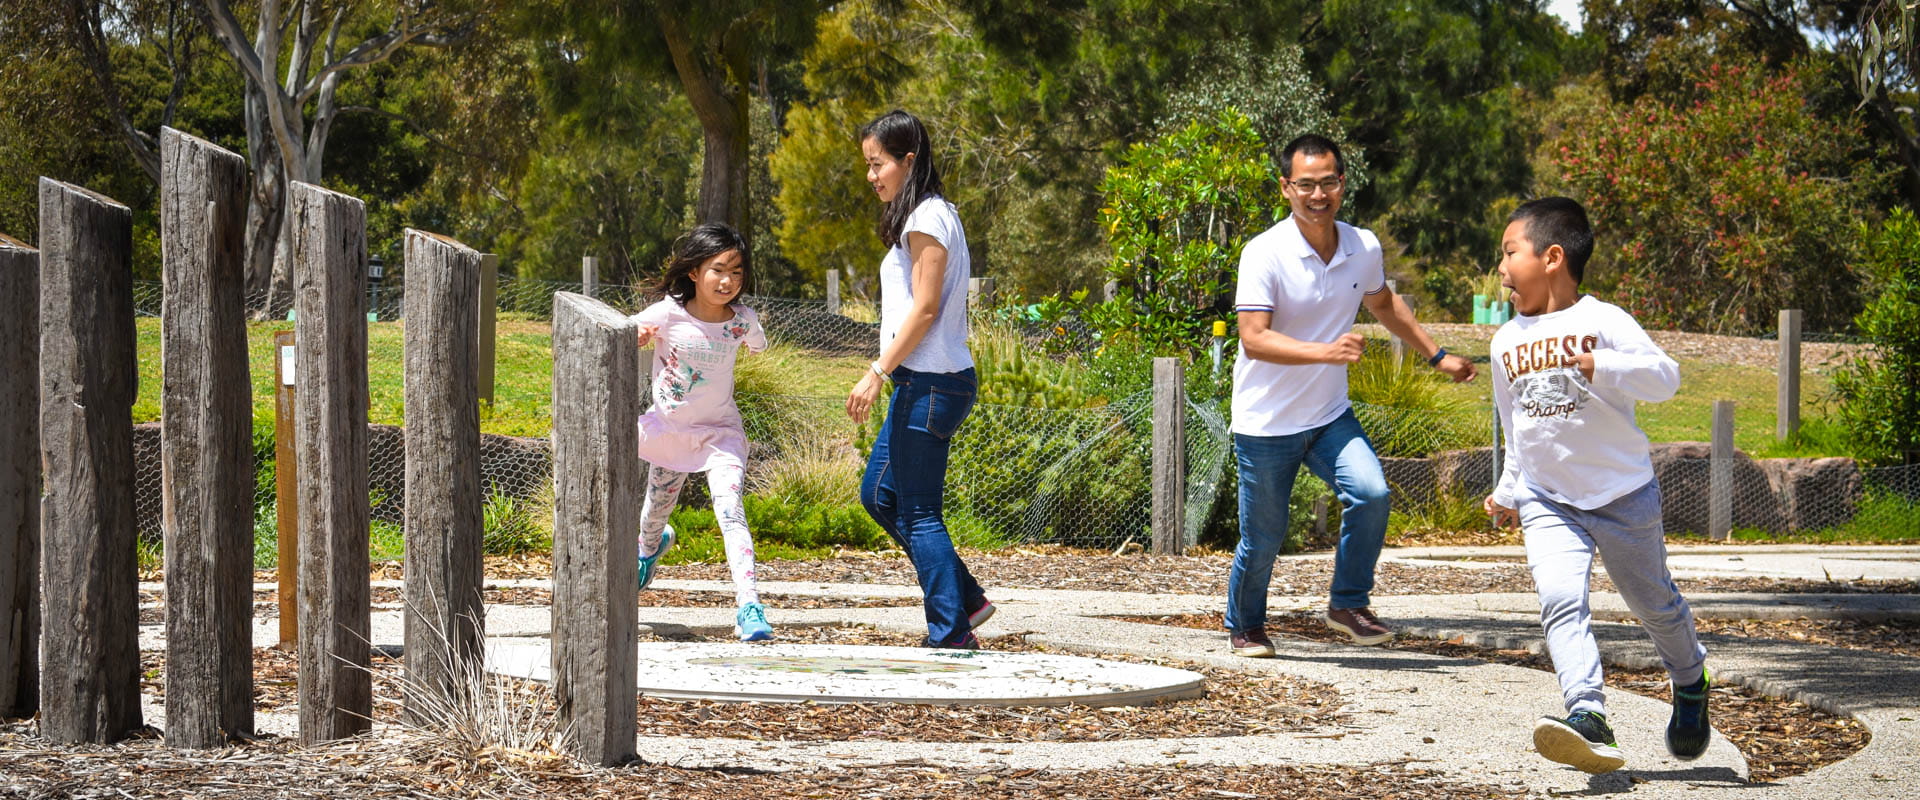 Family play and chase each other around vertical wooden logs in a paved playscape.